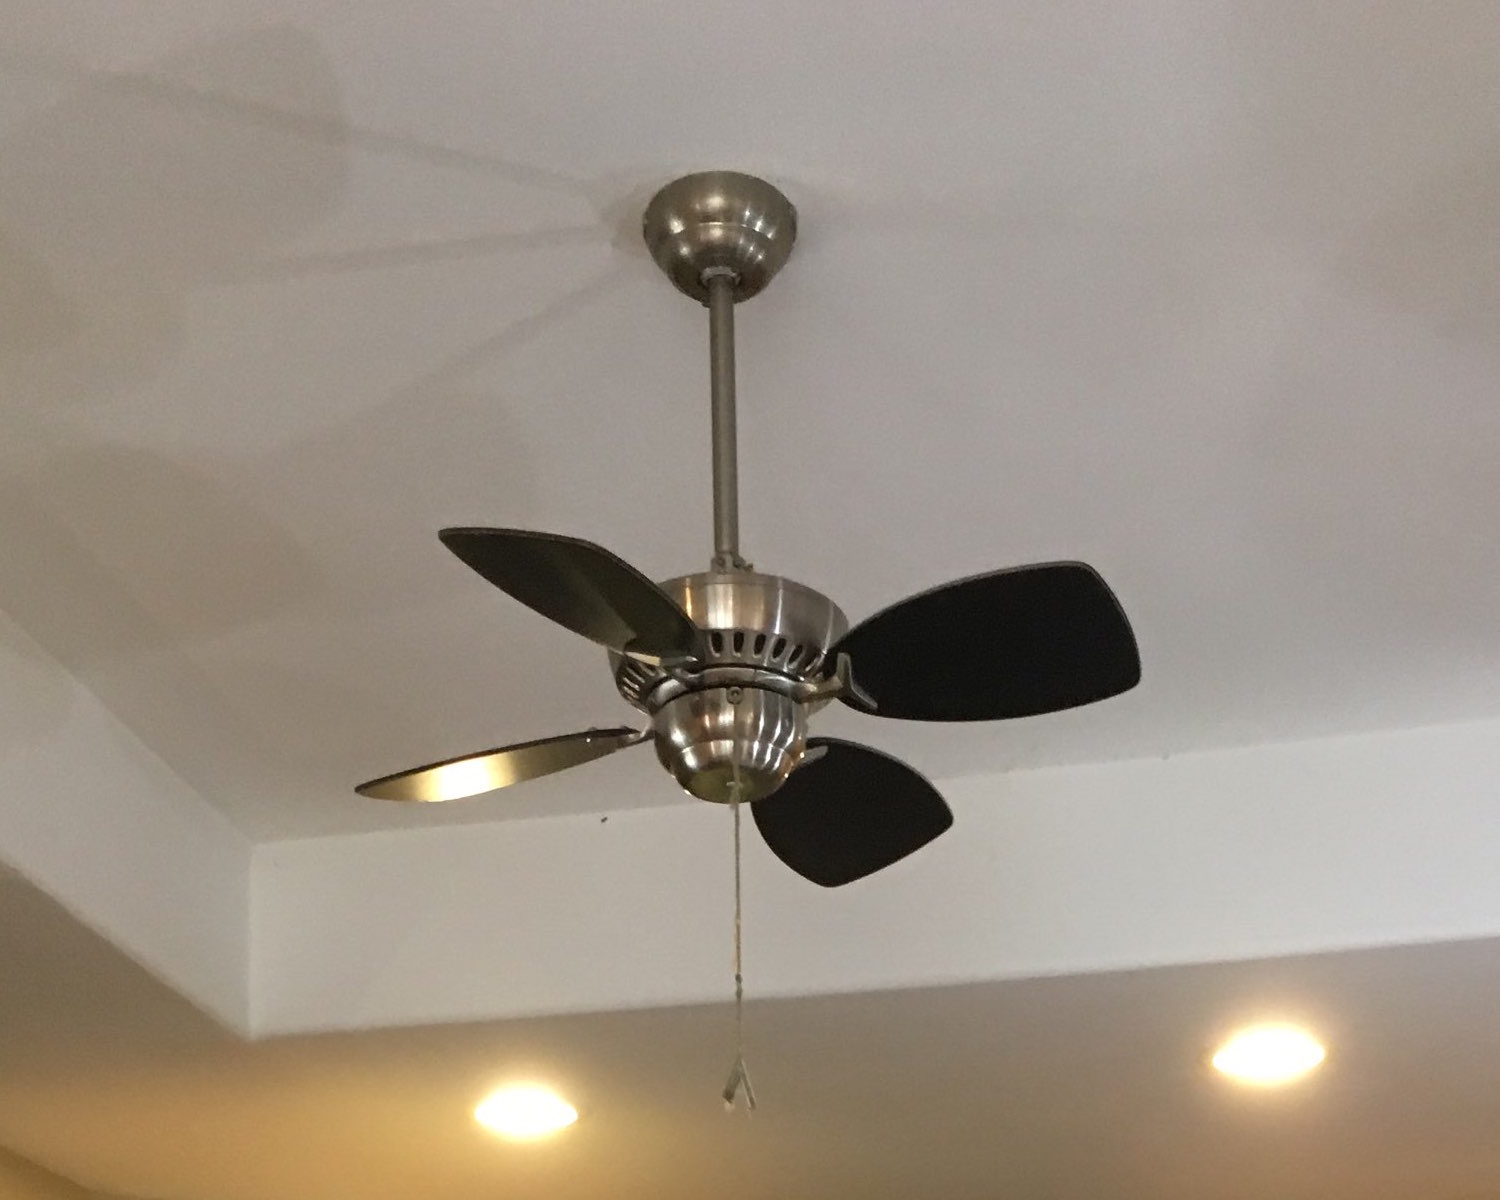 7 Things You May Not Know About Ceiling Fans - Energy Vanguard